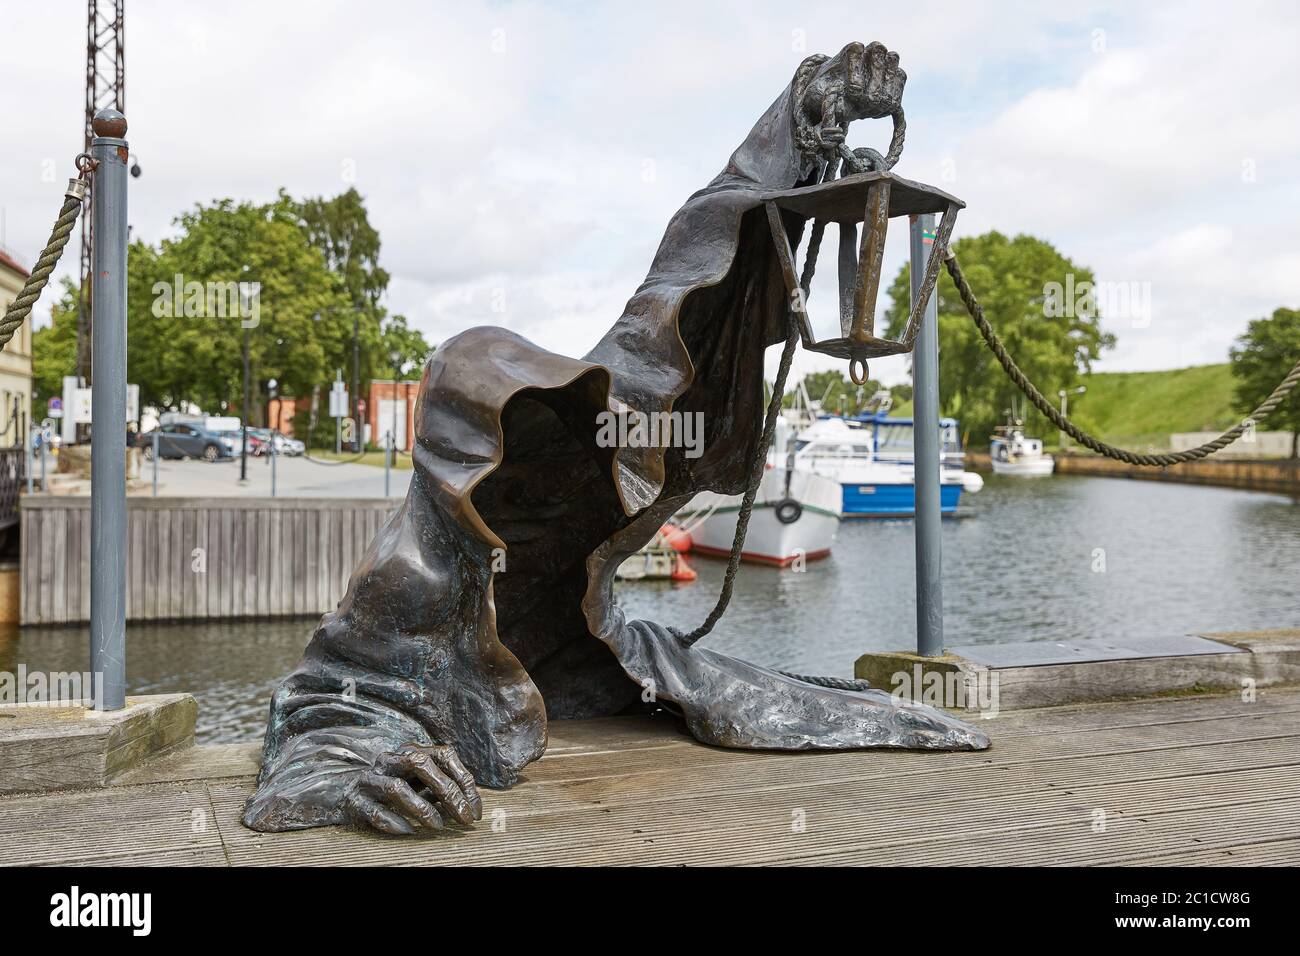 The Black Ghost bronzed sculpture in Klaipeda Lithuania Stock Photo - Alamy